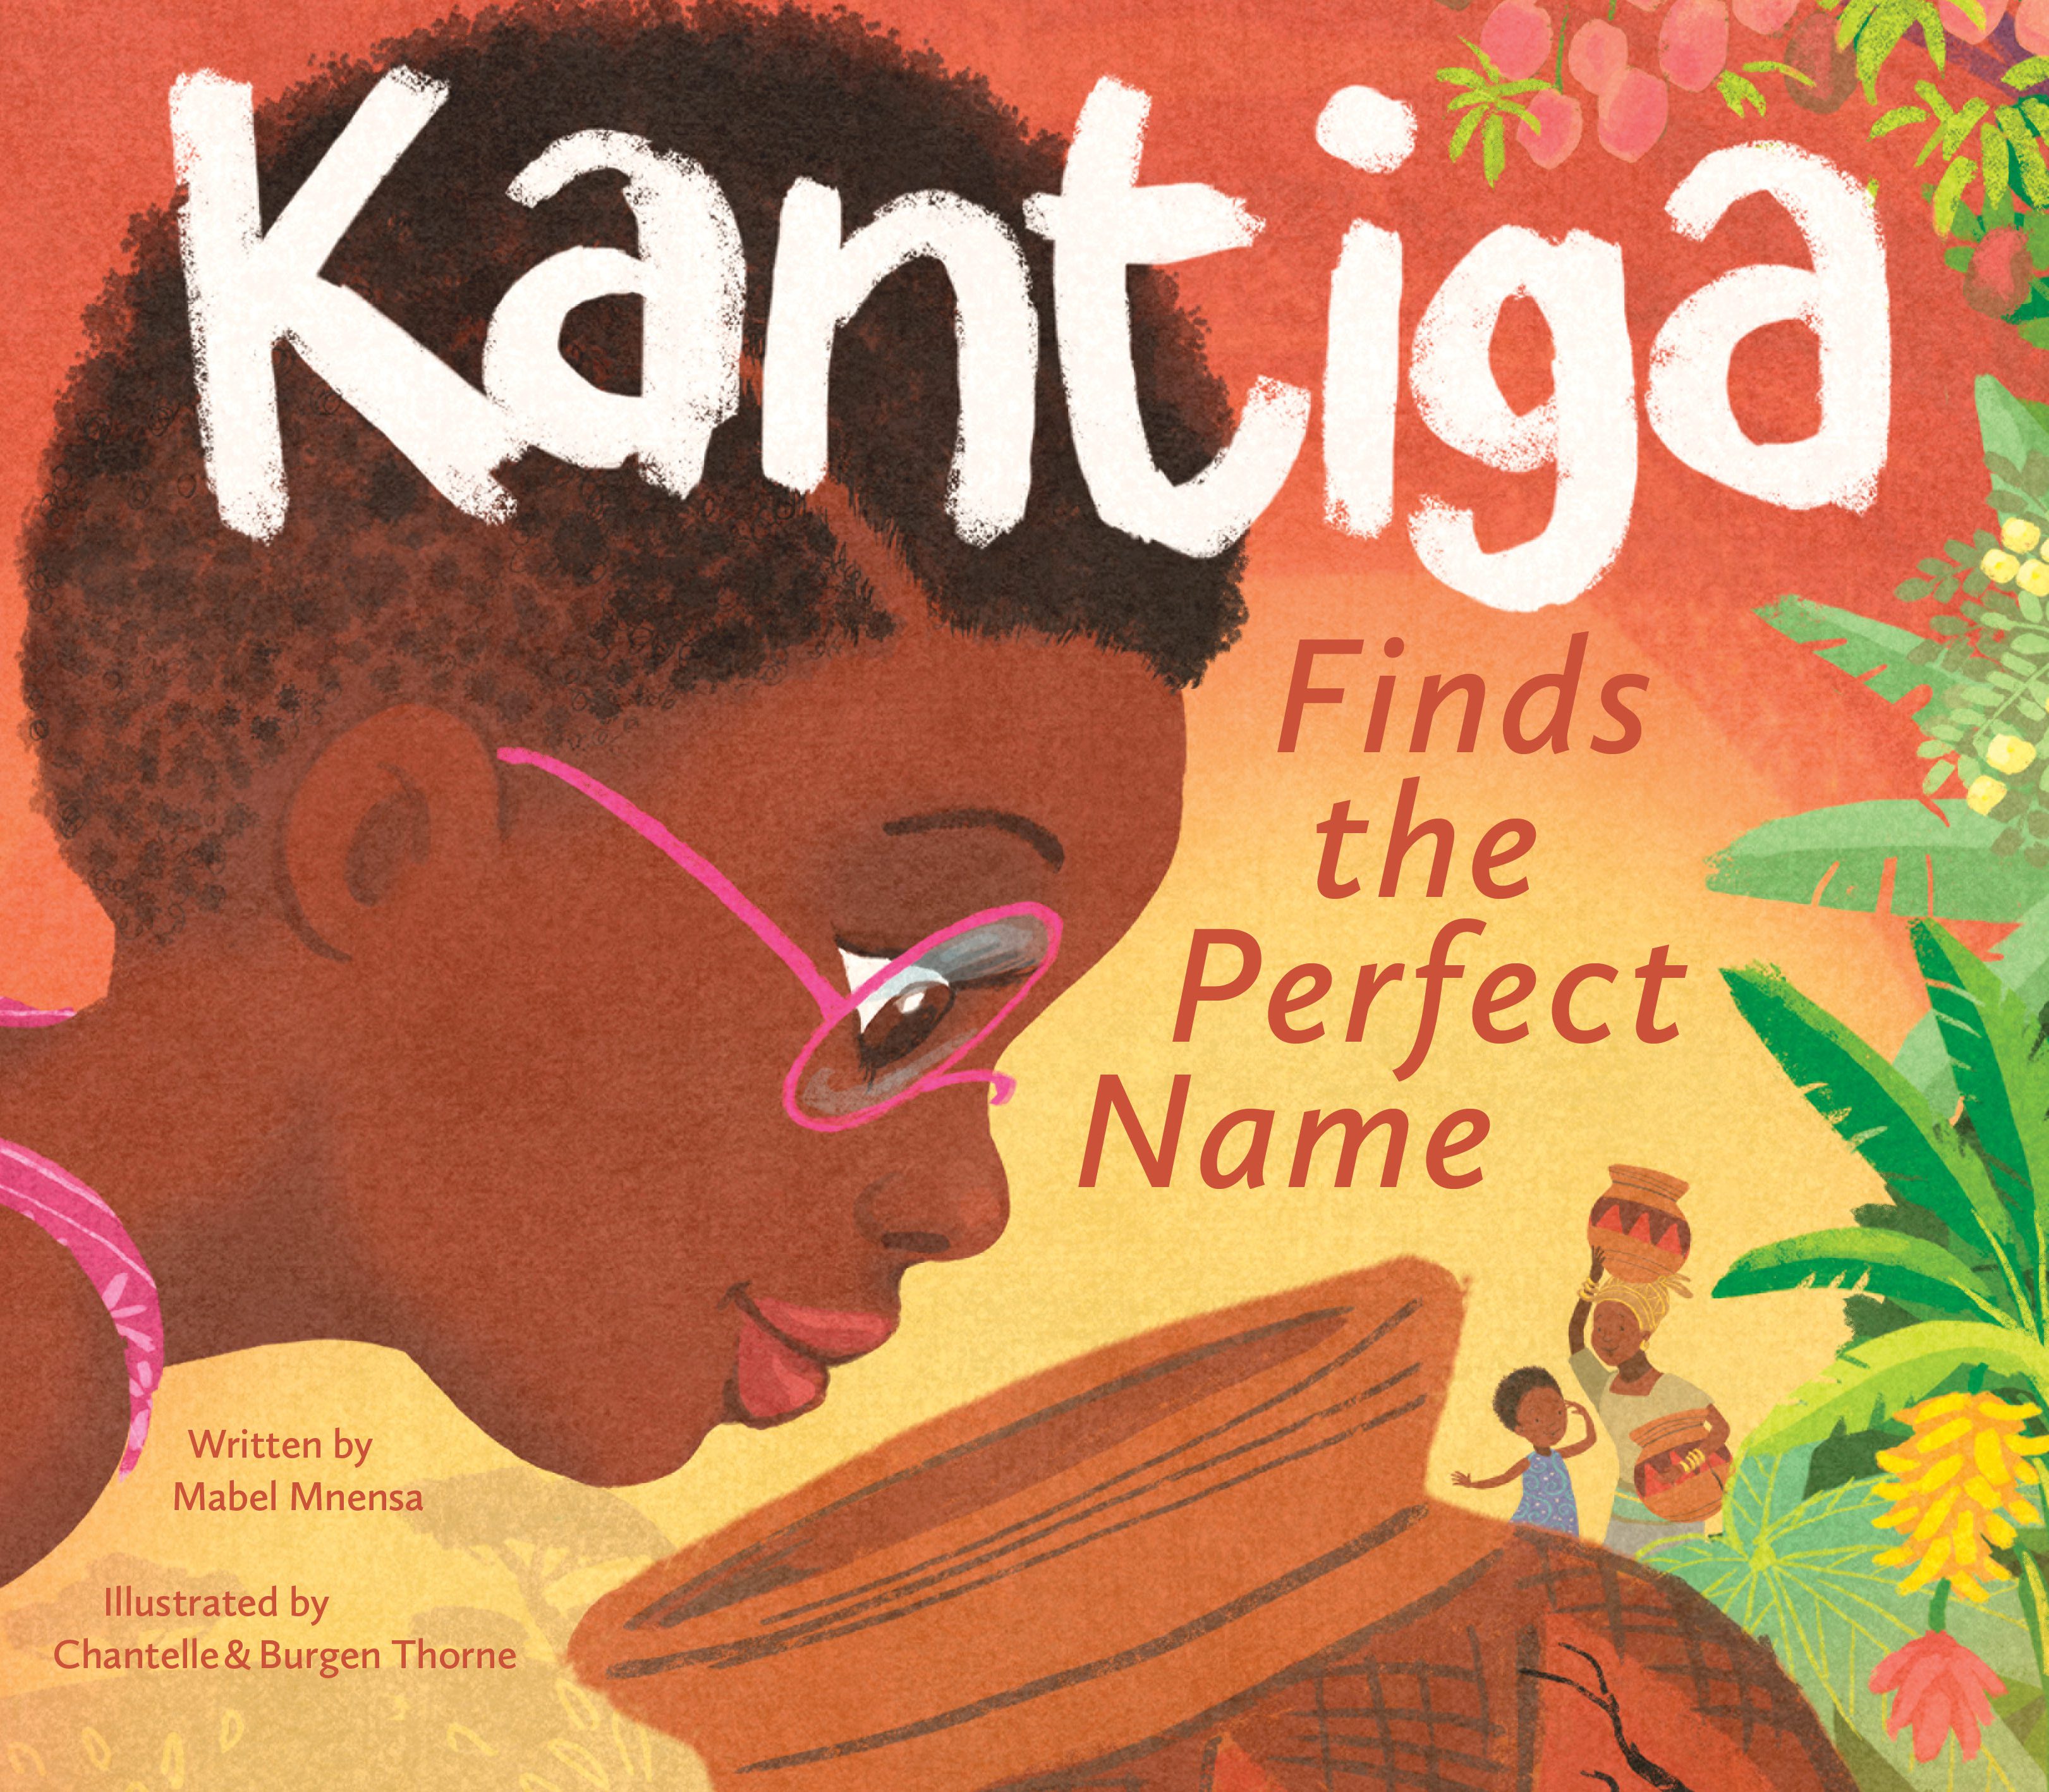 Kantiga Finds the Perfect Name